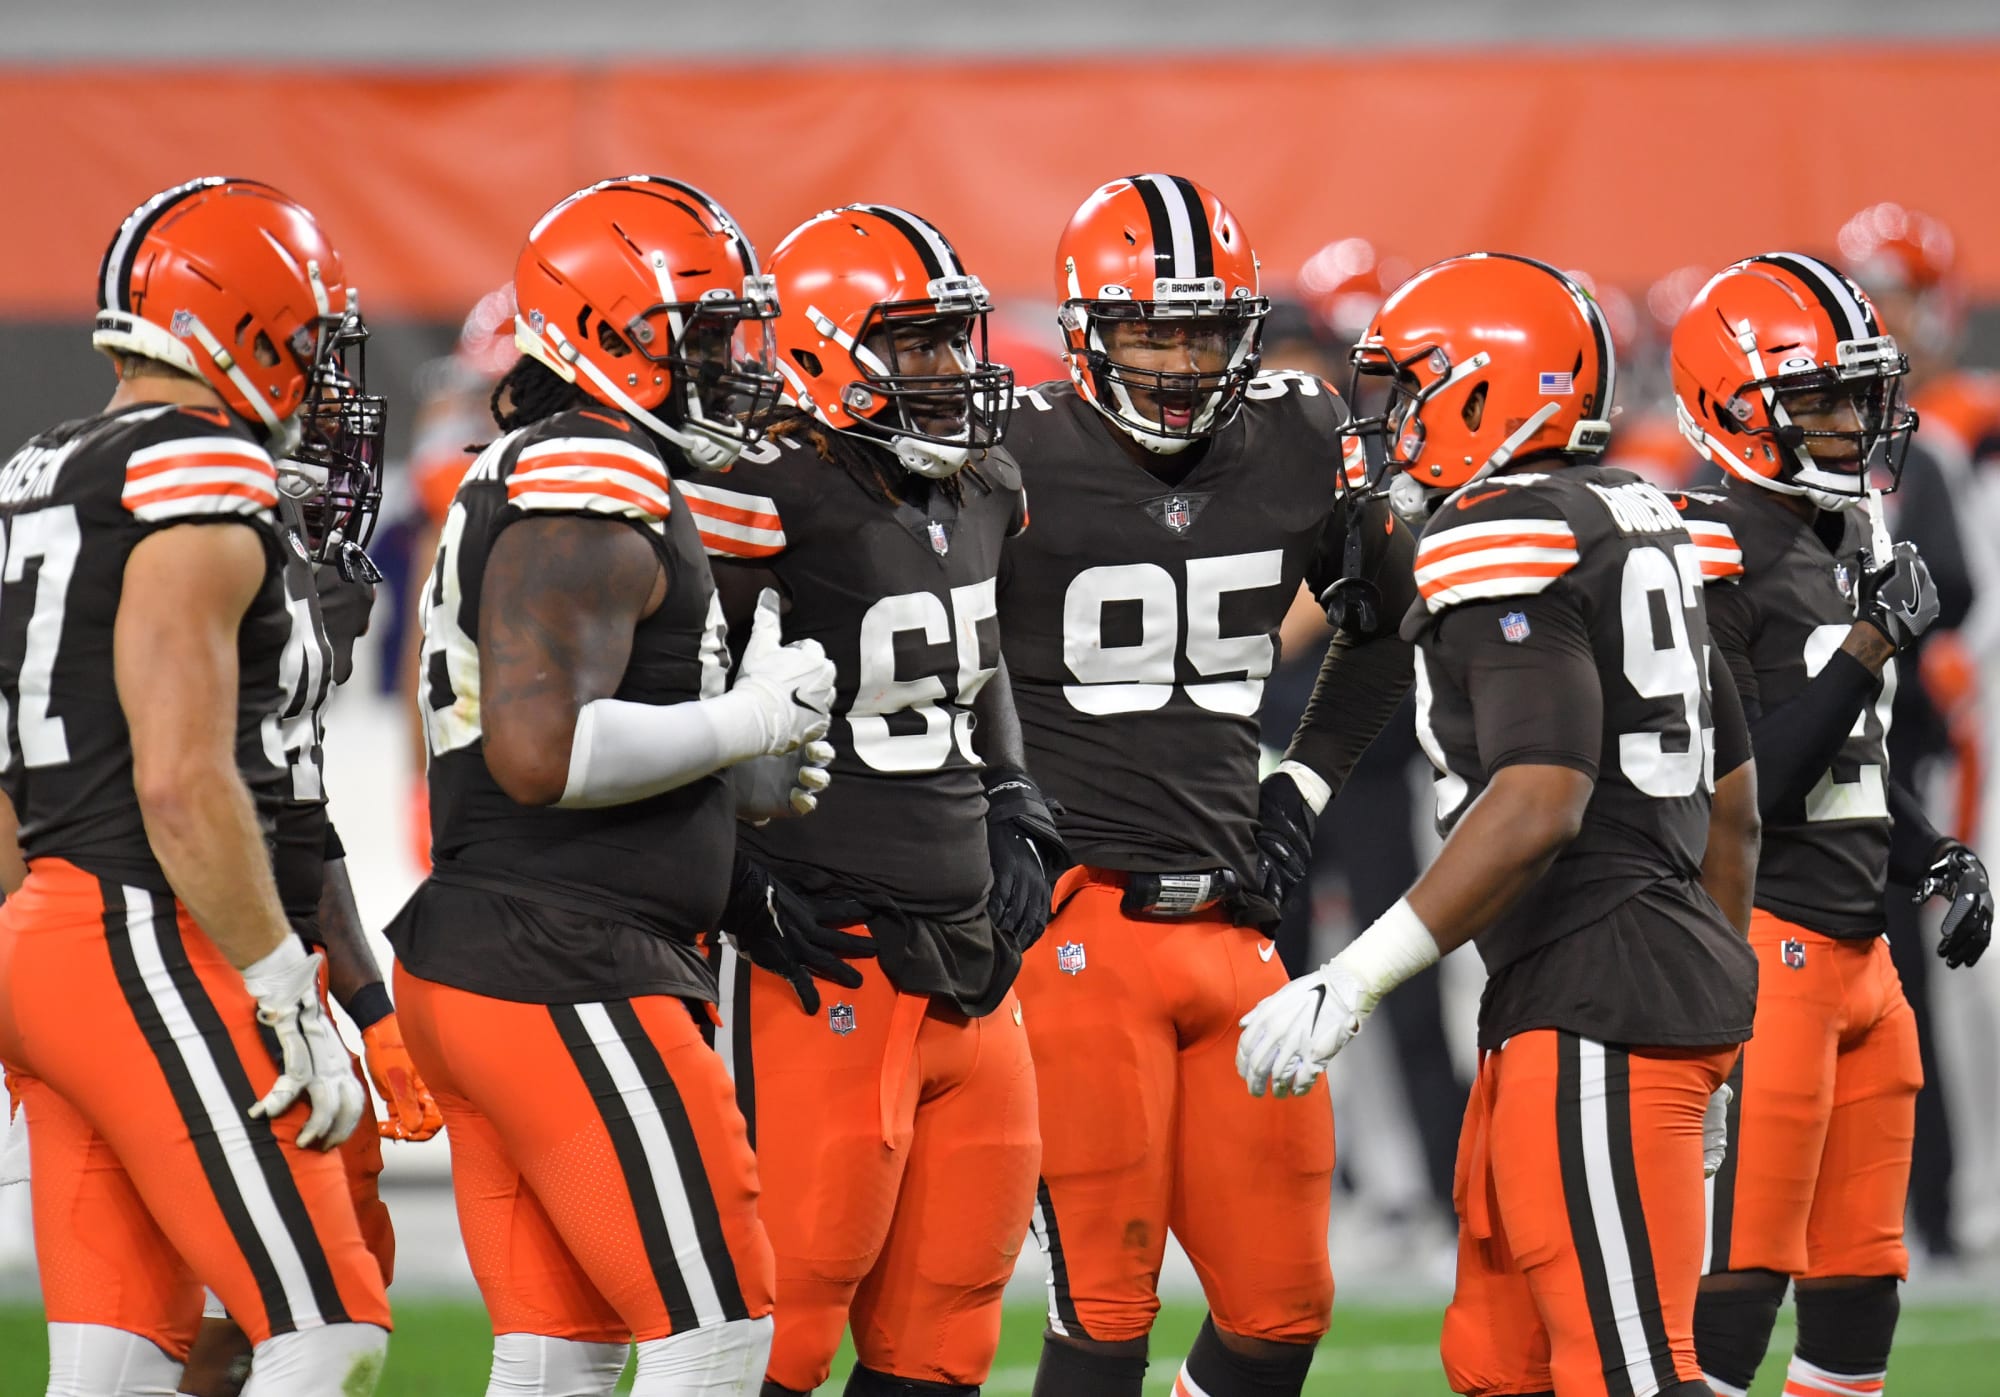 Browns will officially have a terrible defense if they can't stop